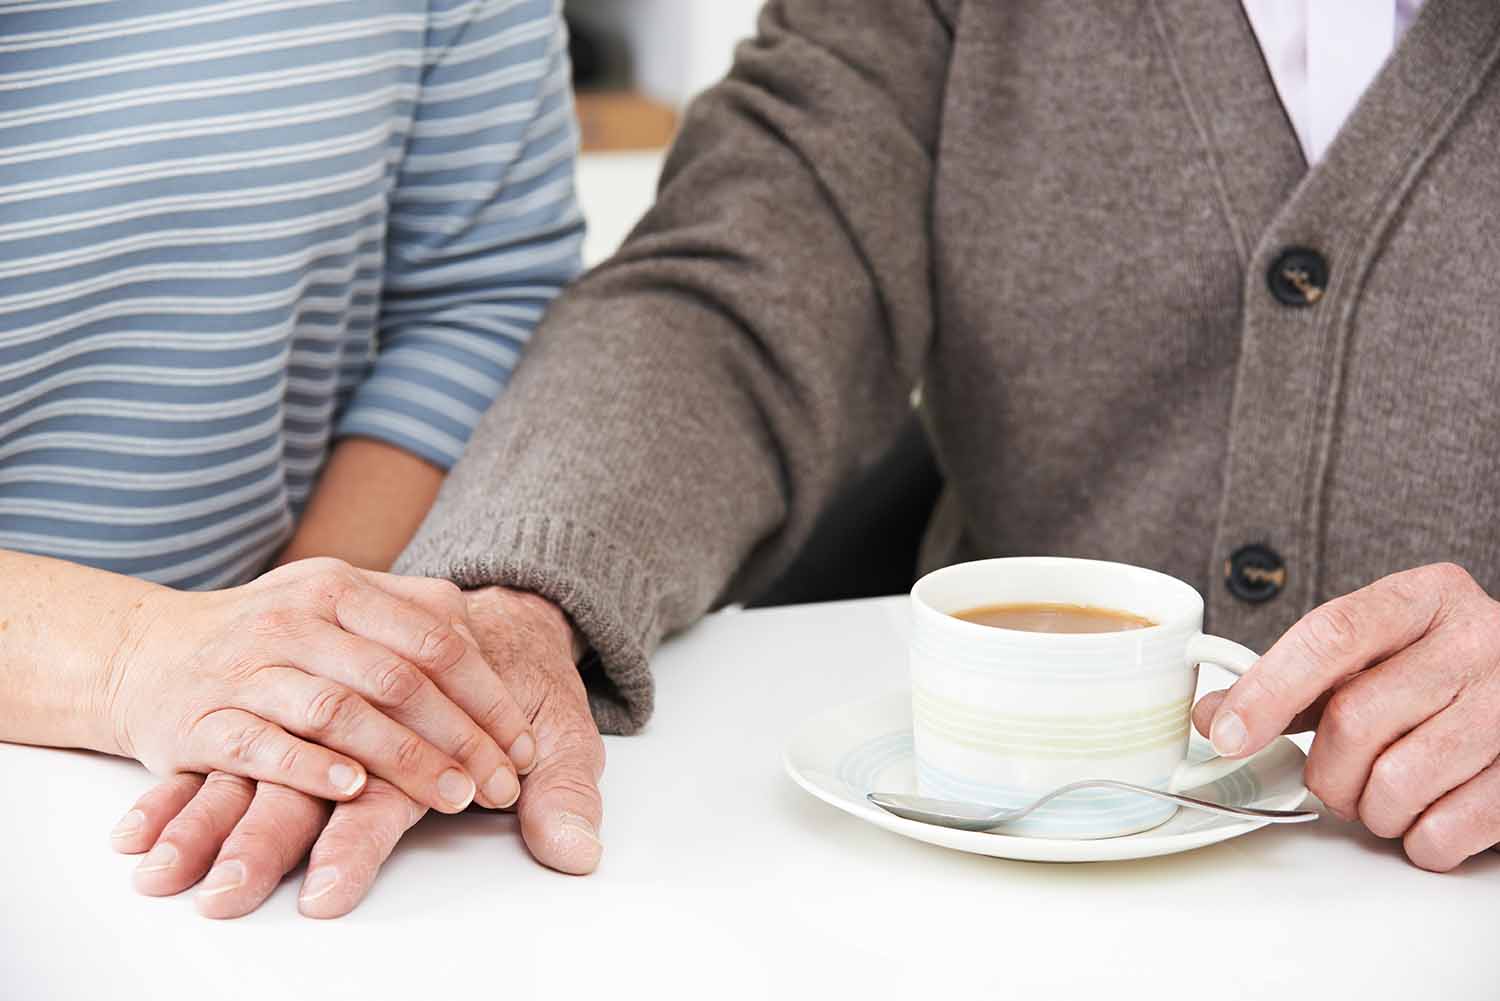 Daughter sharing tea with aging father